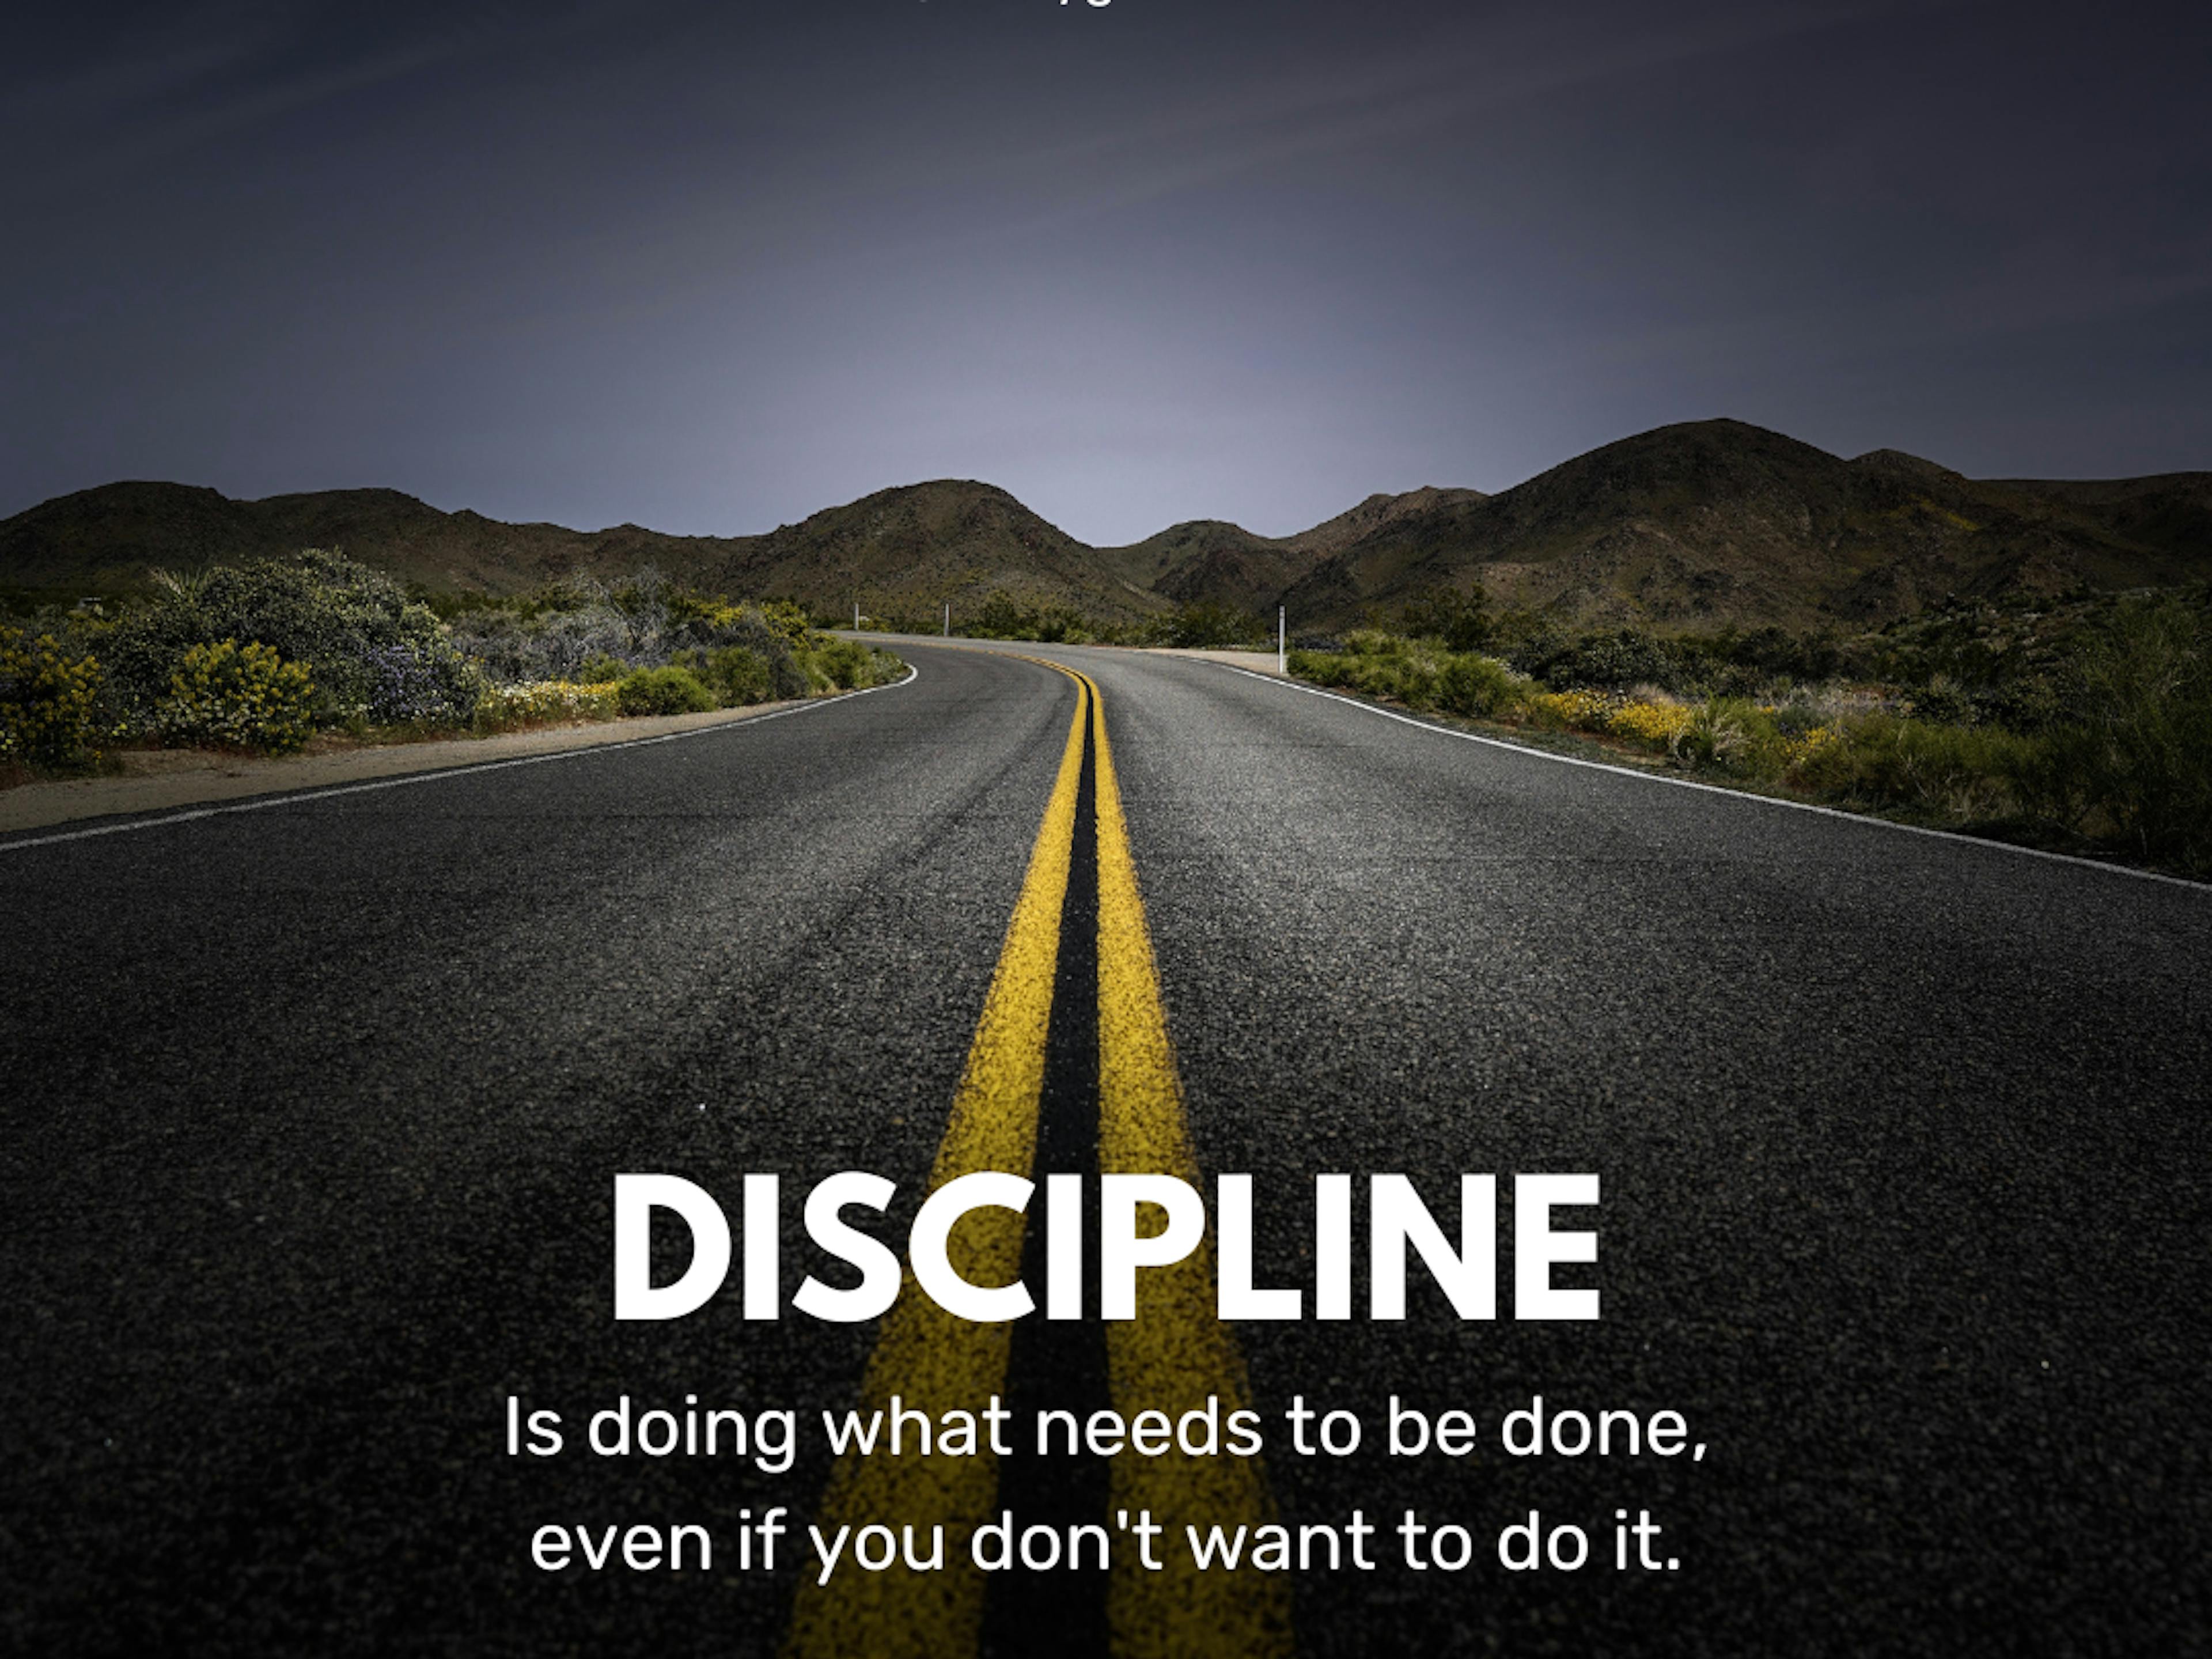 Discipline is donig what needs to be done even if you don't want to do it